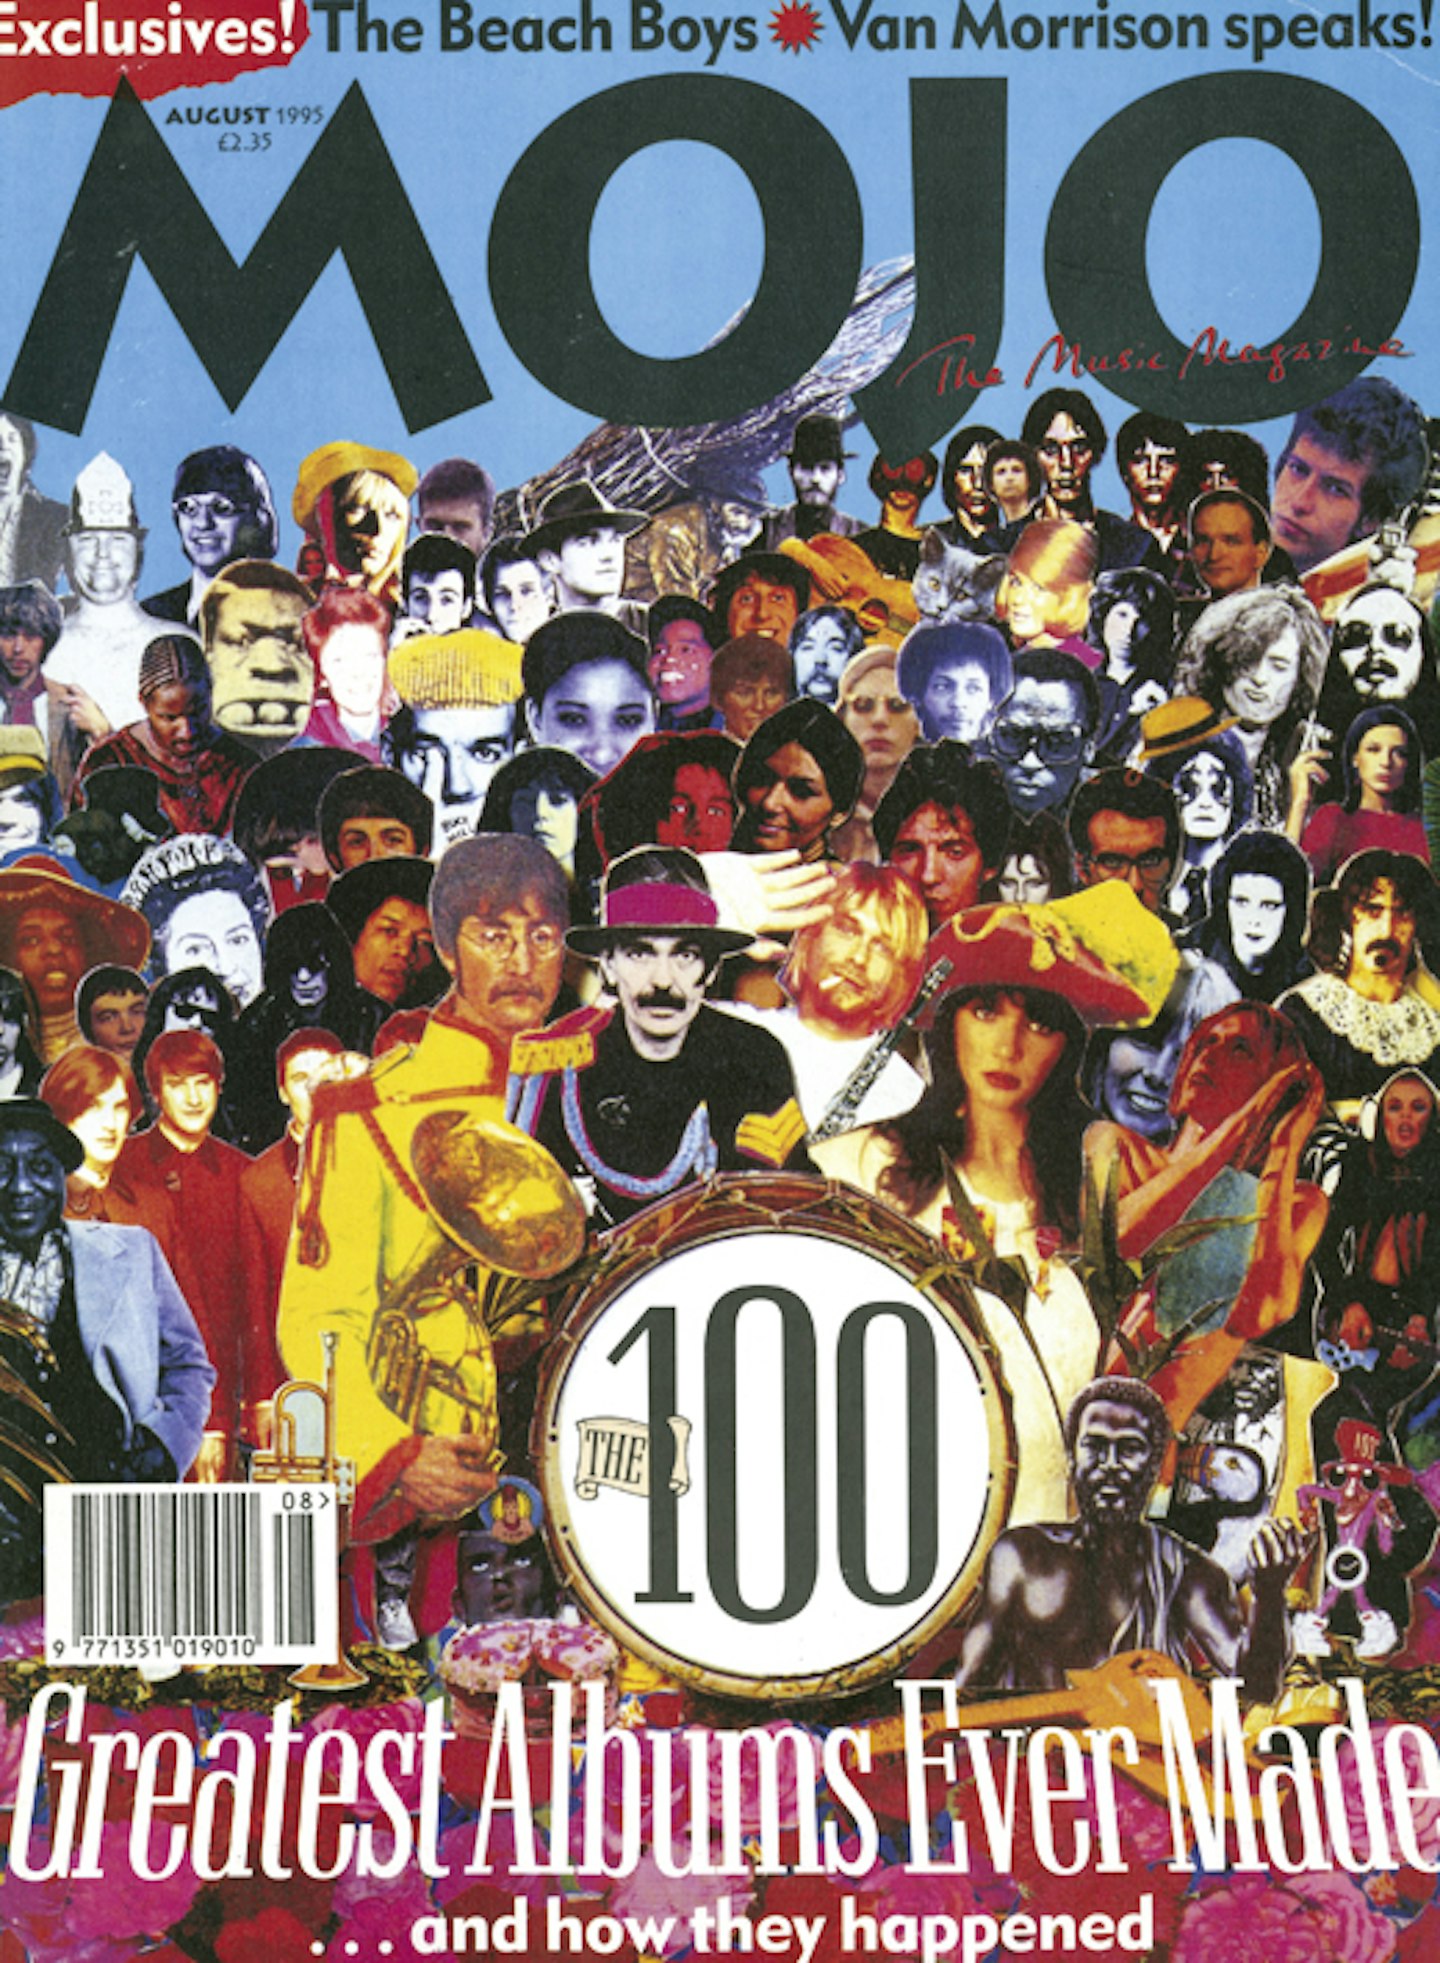 MOJO Issue 21 / August 1995